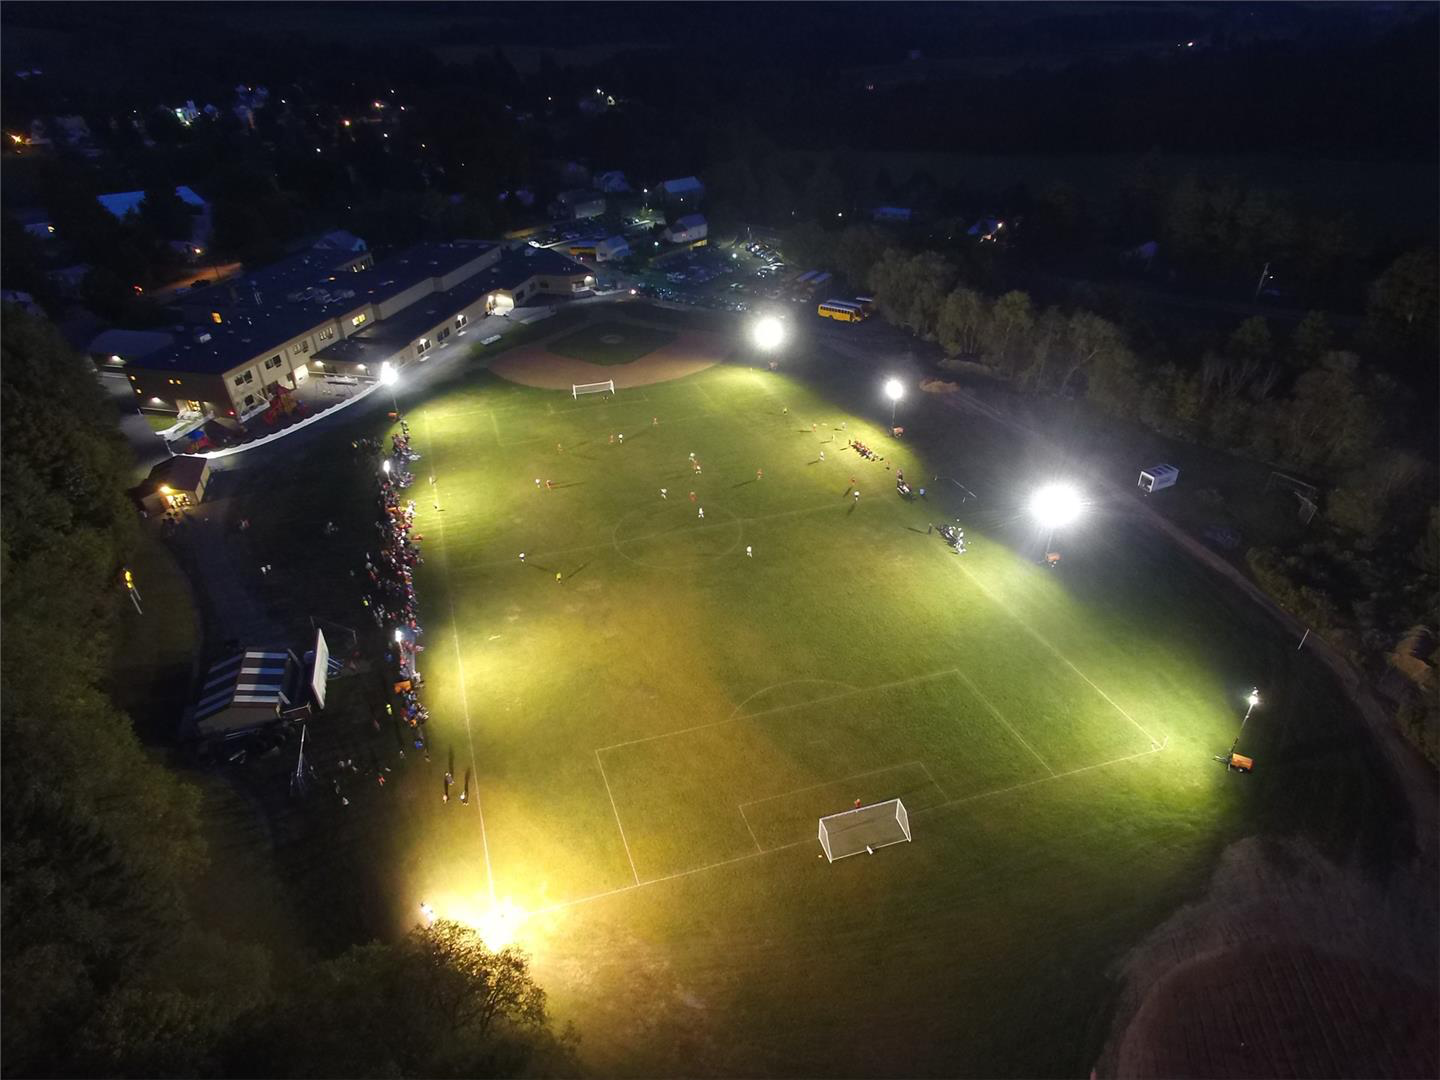 school athletic field with soccer players playing under the lights